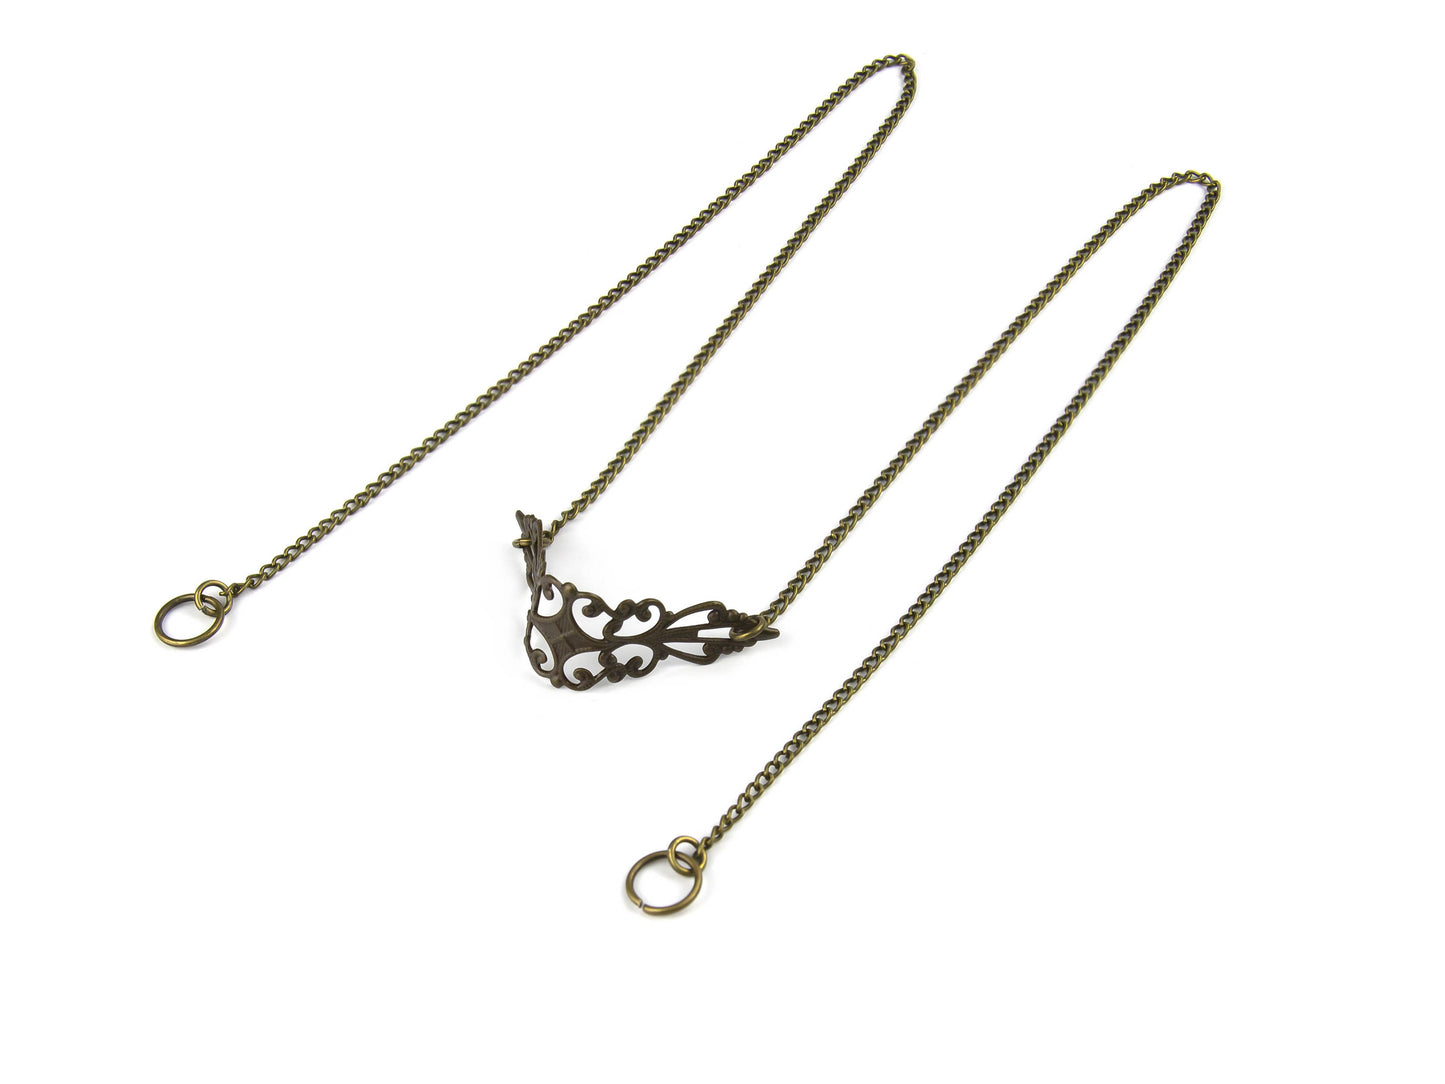 Elegant Myril Jewels bronze nose chain, with a detailed filigree design, exuding neo-gothic charm, set against a pure white background, perfect for gothic-chic fashion statements